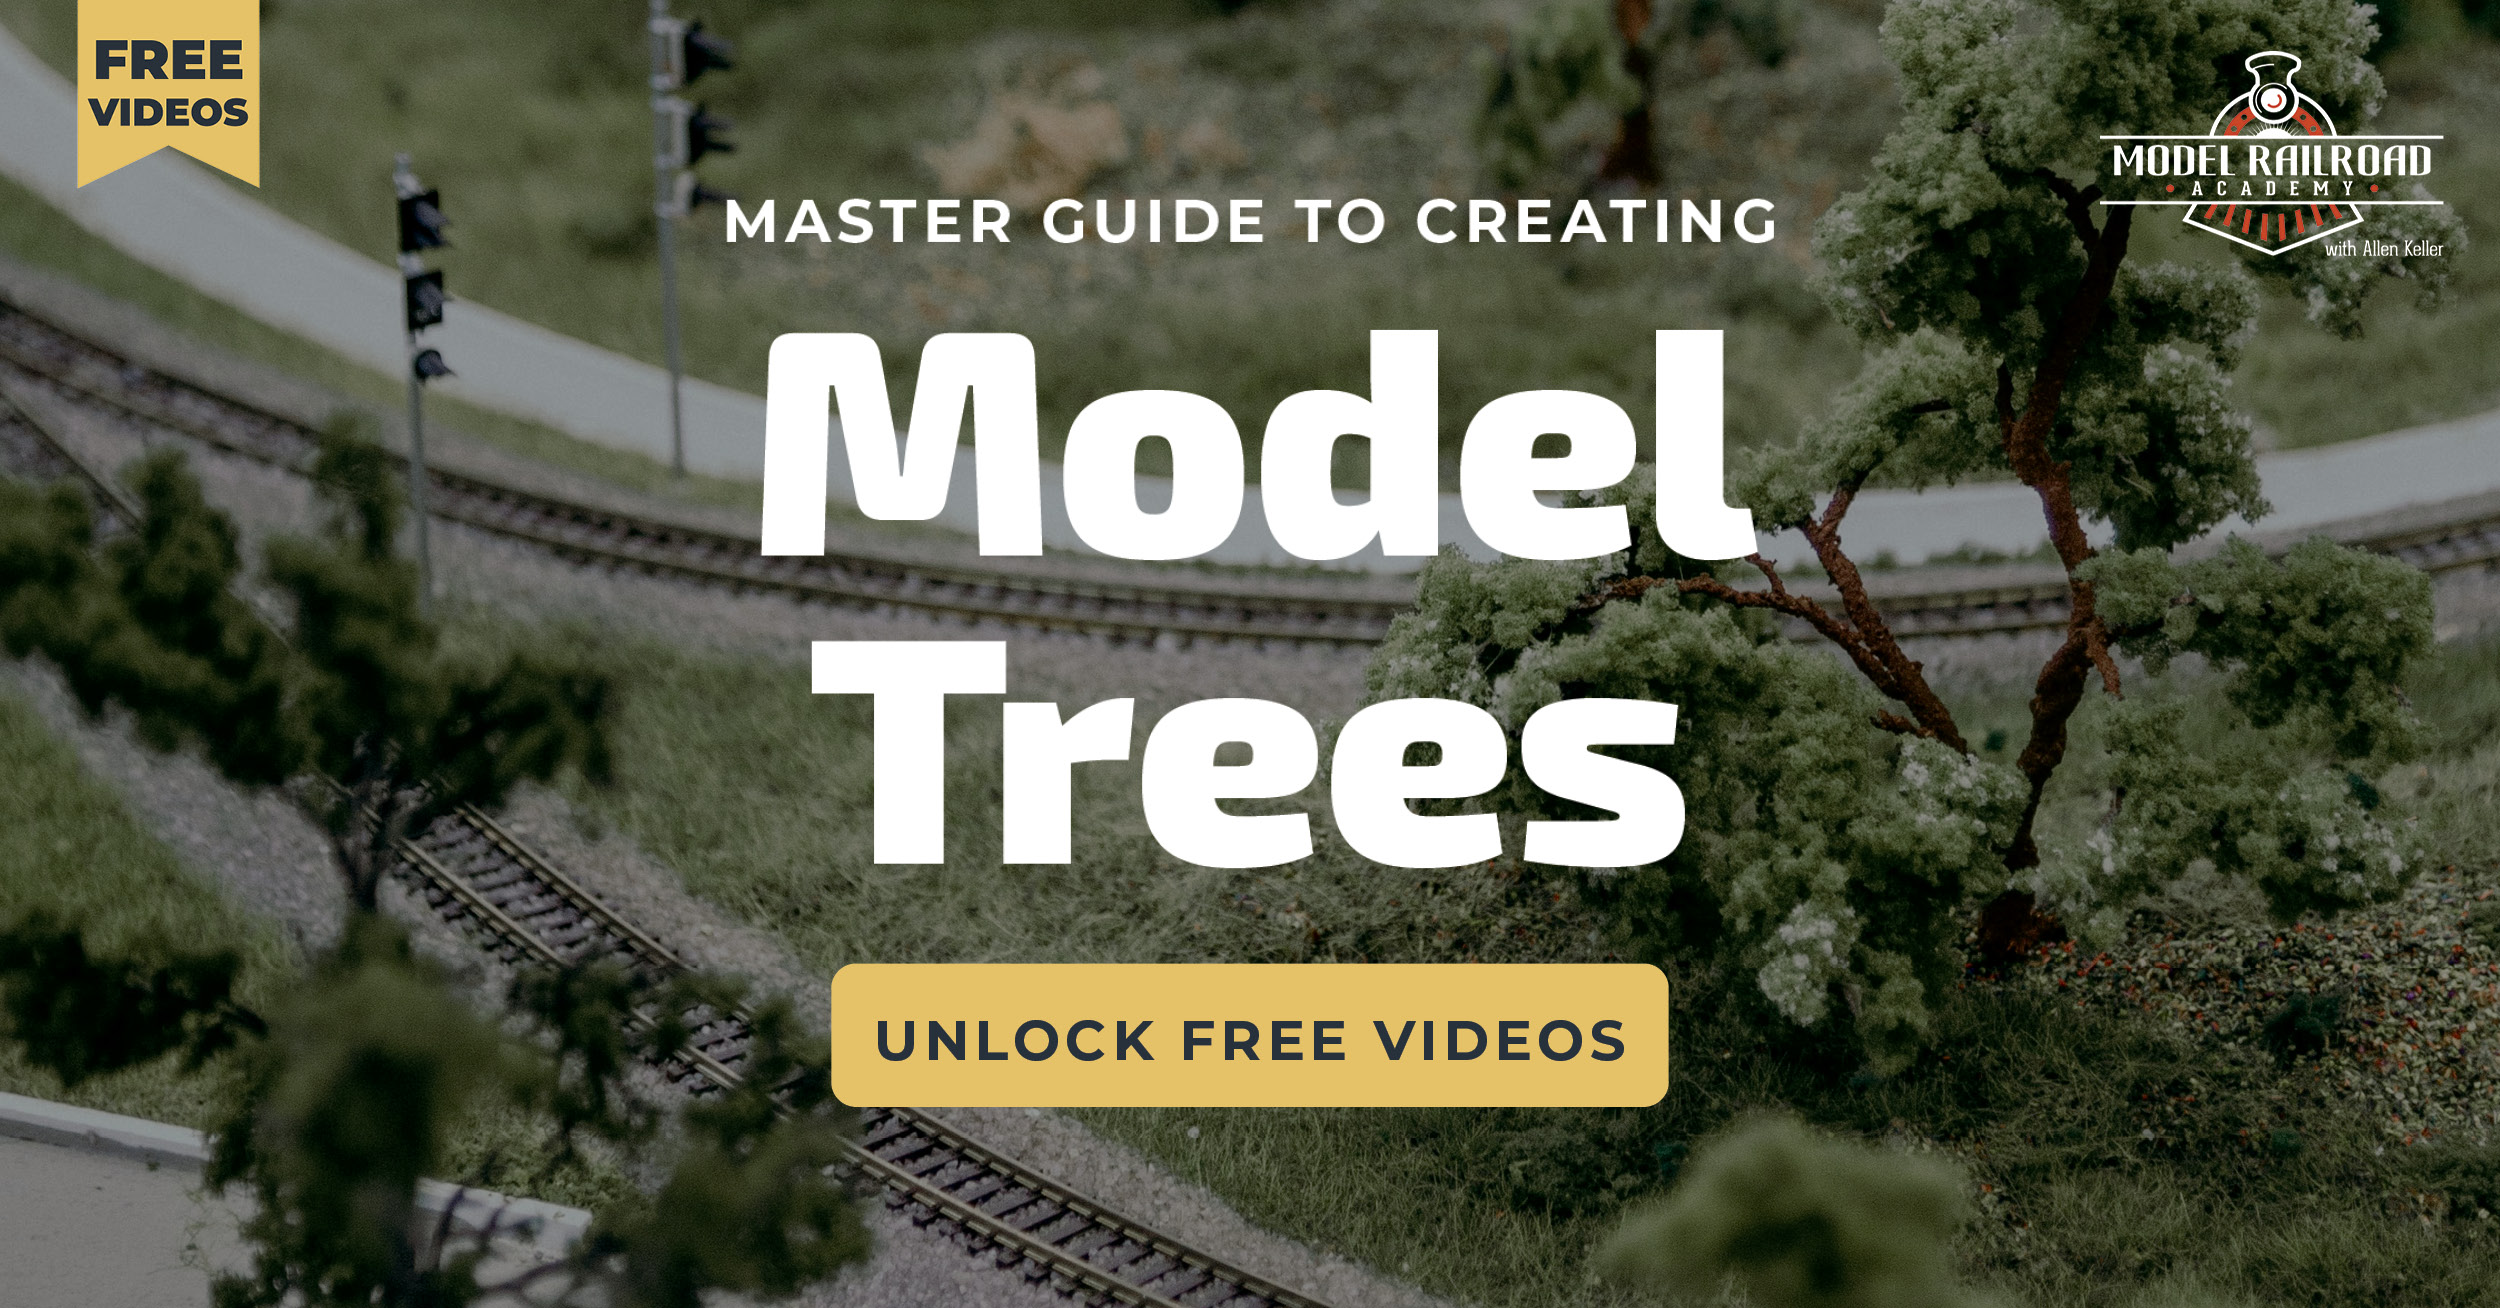 Master Guide to Creating Model Treesproduct featured image thumbnail.